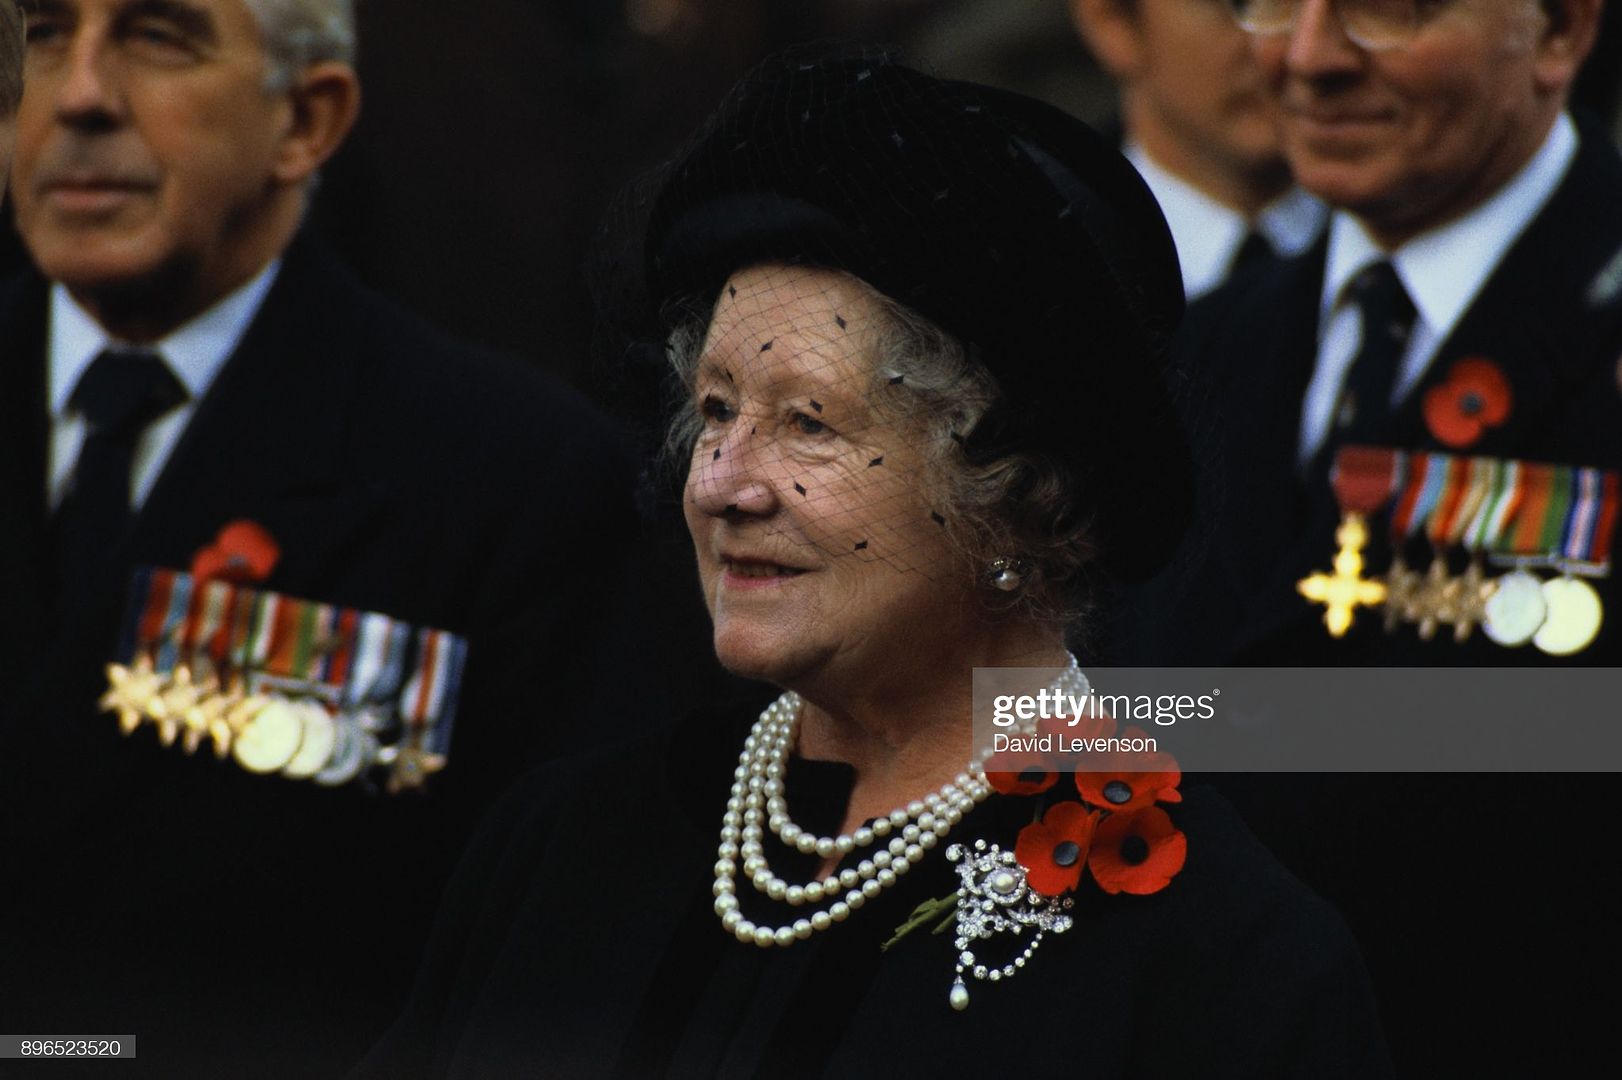 1984_gettyimages-896523520-2048x2048